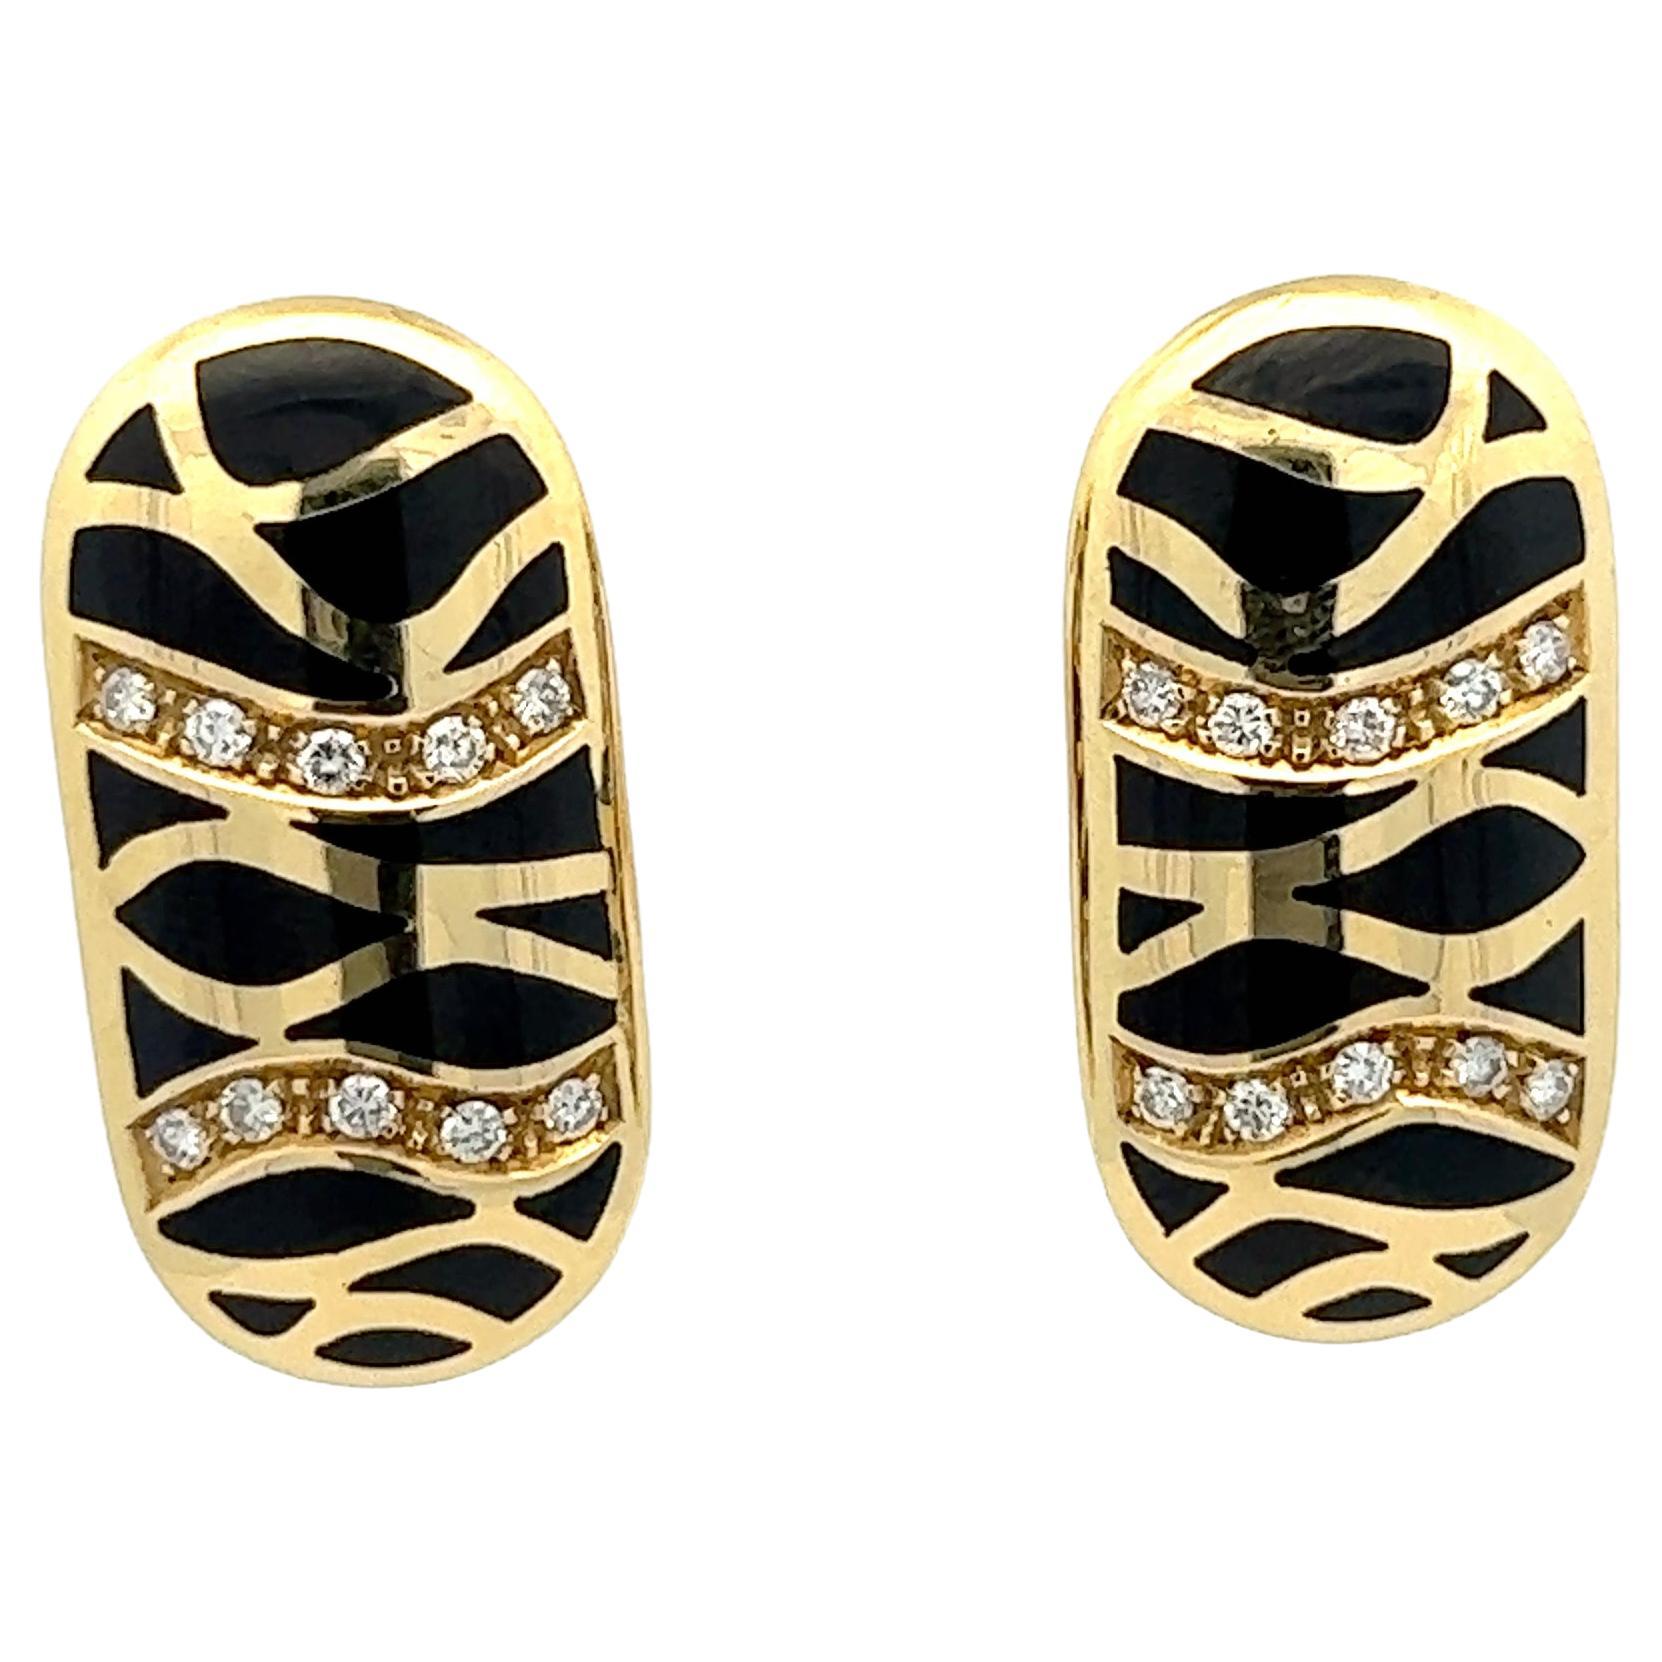 A pair of 18k yellow gold, Diamond and black enamel ear clips by Illario. For Sale